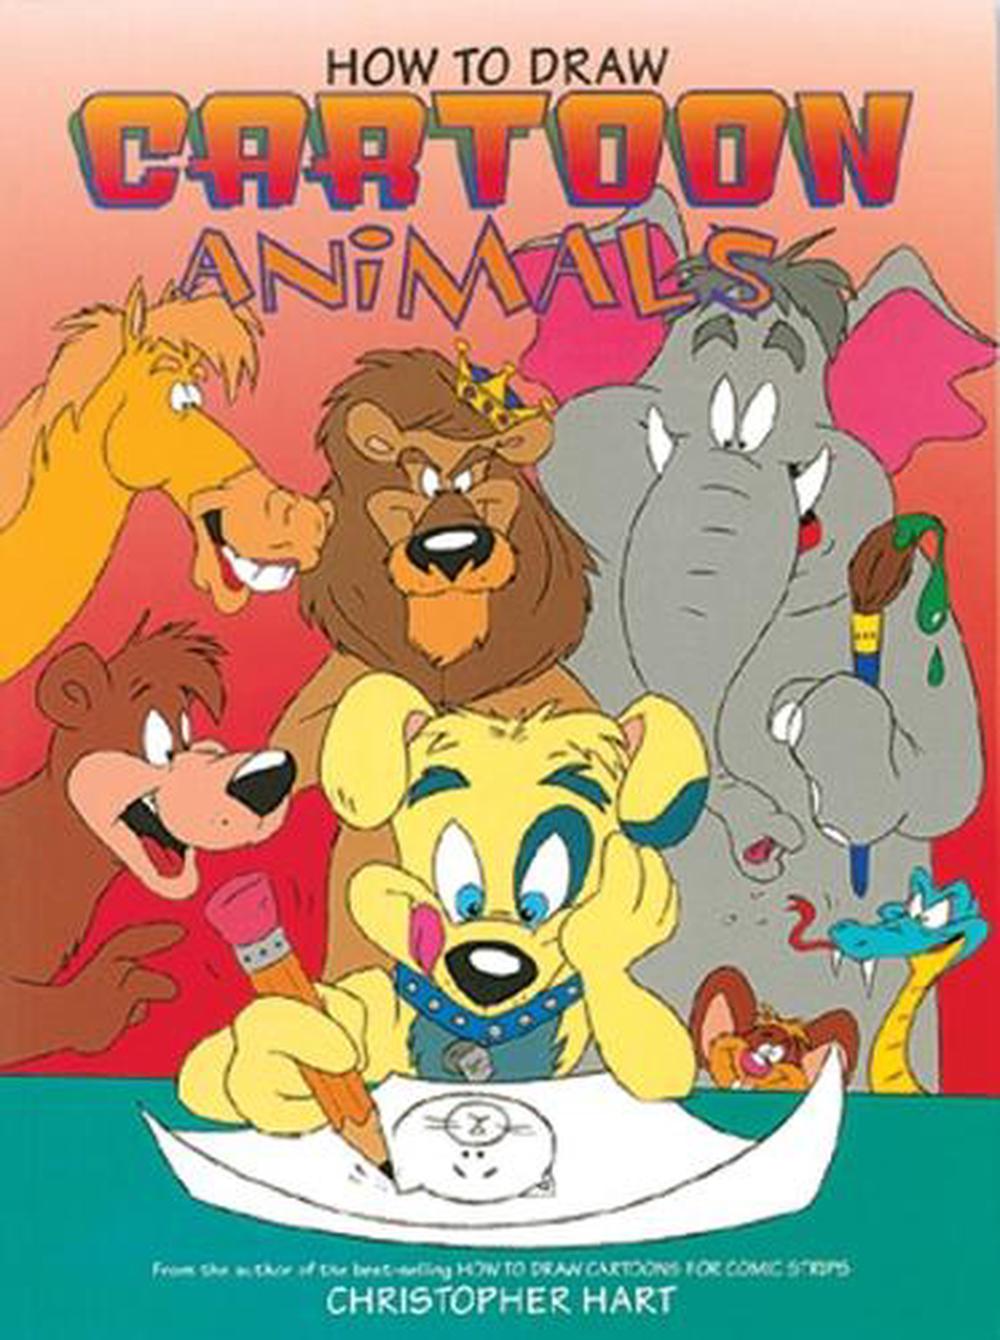 How to Draw Cartoon Animals by Christopher Hart (English) Paperback